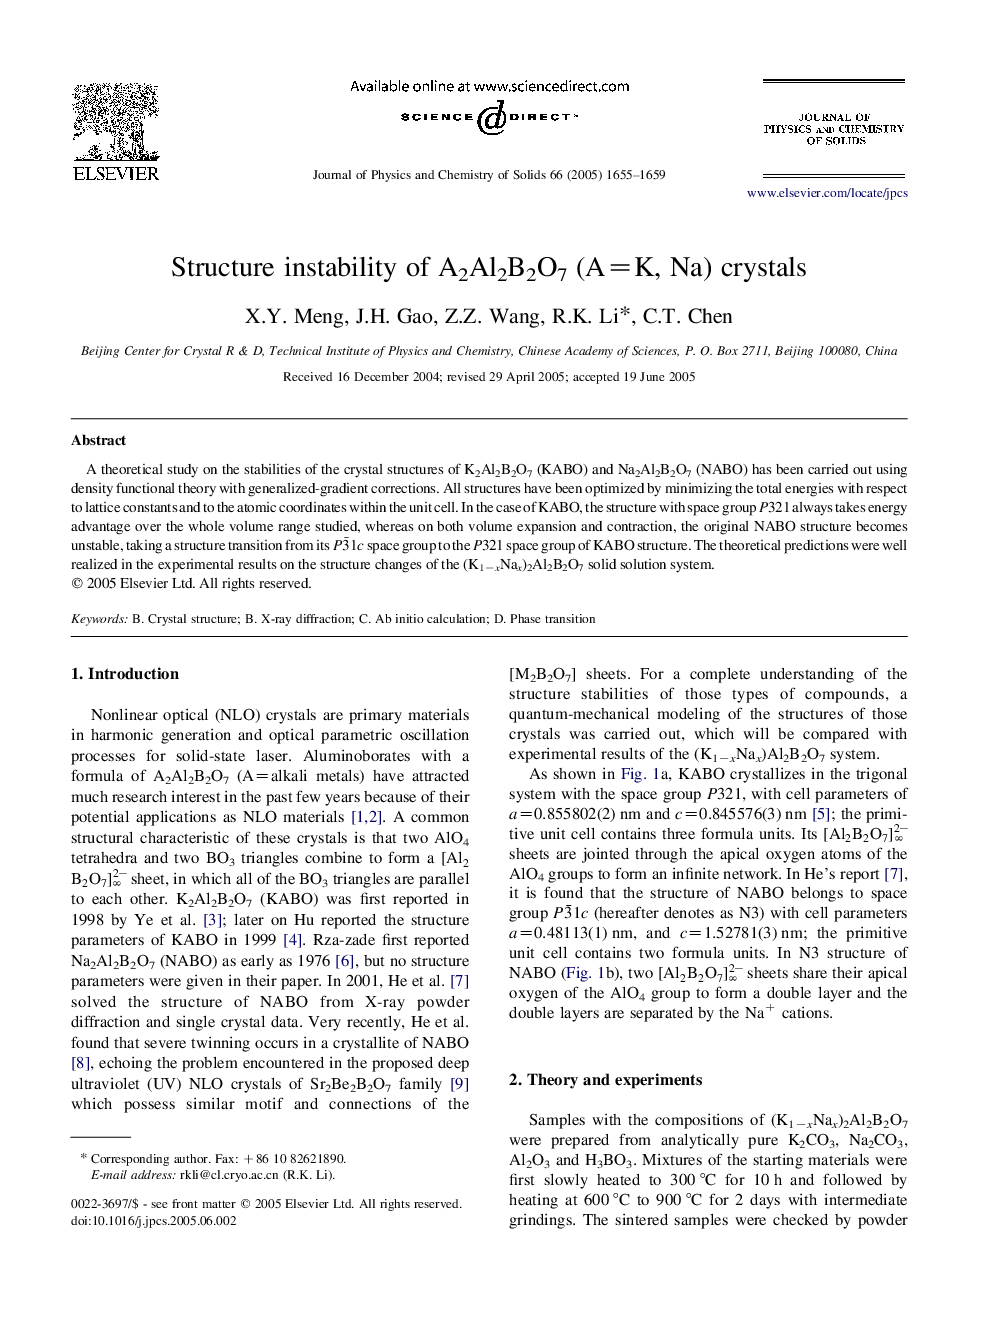 Structure instability of A2Al2B2O7 (A=K, Na) crystals